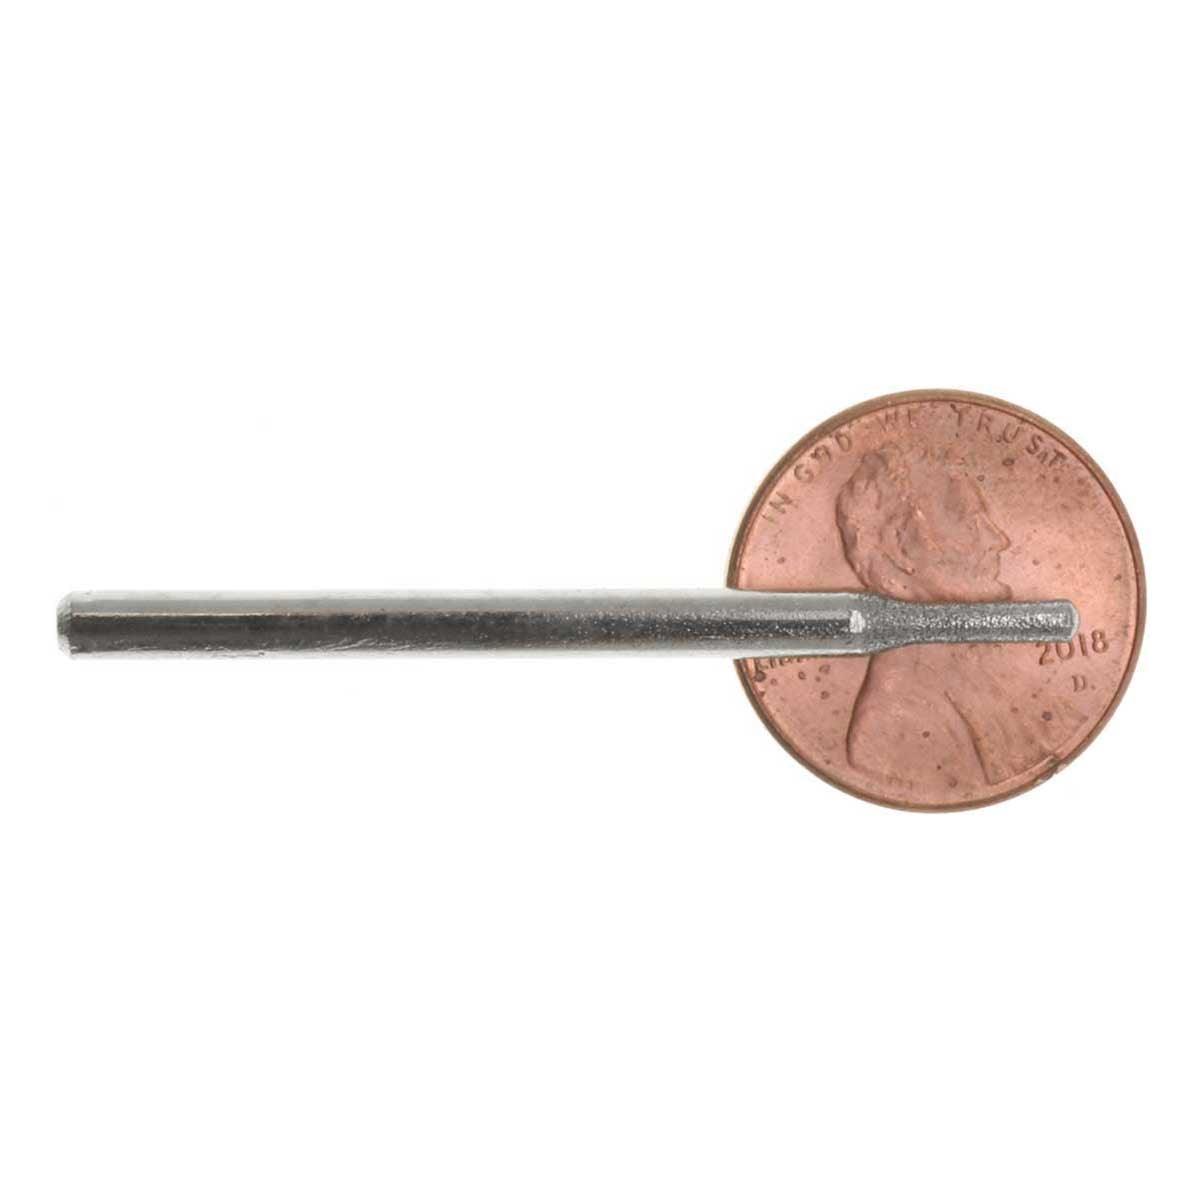 02.0mm - 5/64 inch 240 Grit Rounded Cylinder Diamond Burrs - 2pc - 1/8 inch shank